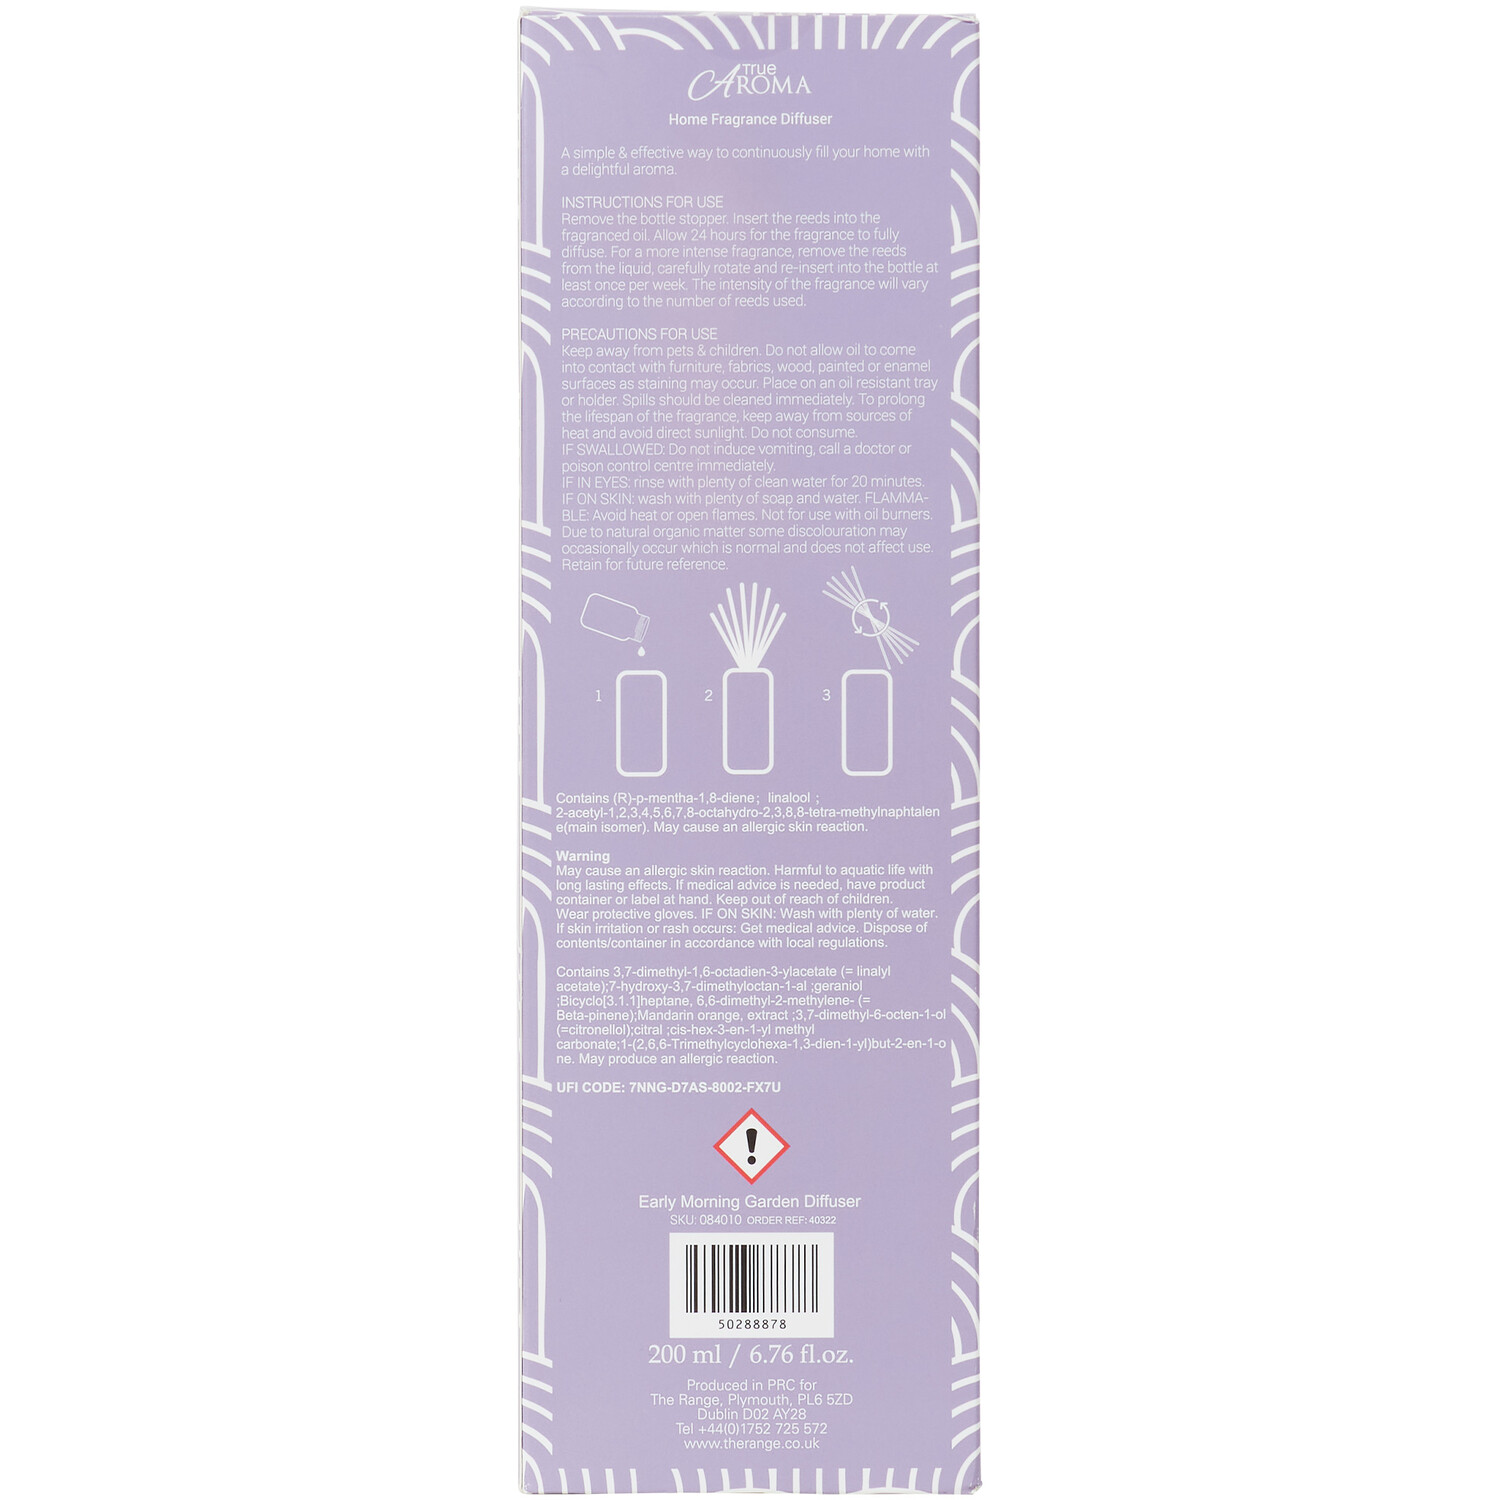 Early Morning Garden Diffuser 200ml - Purple Image 4